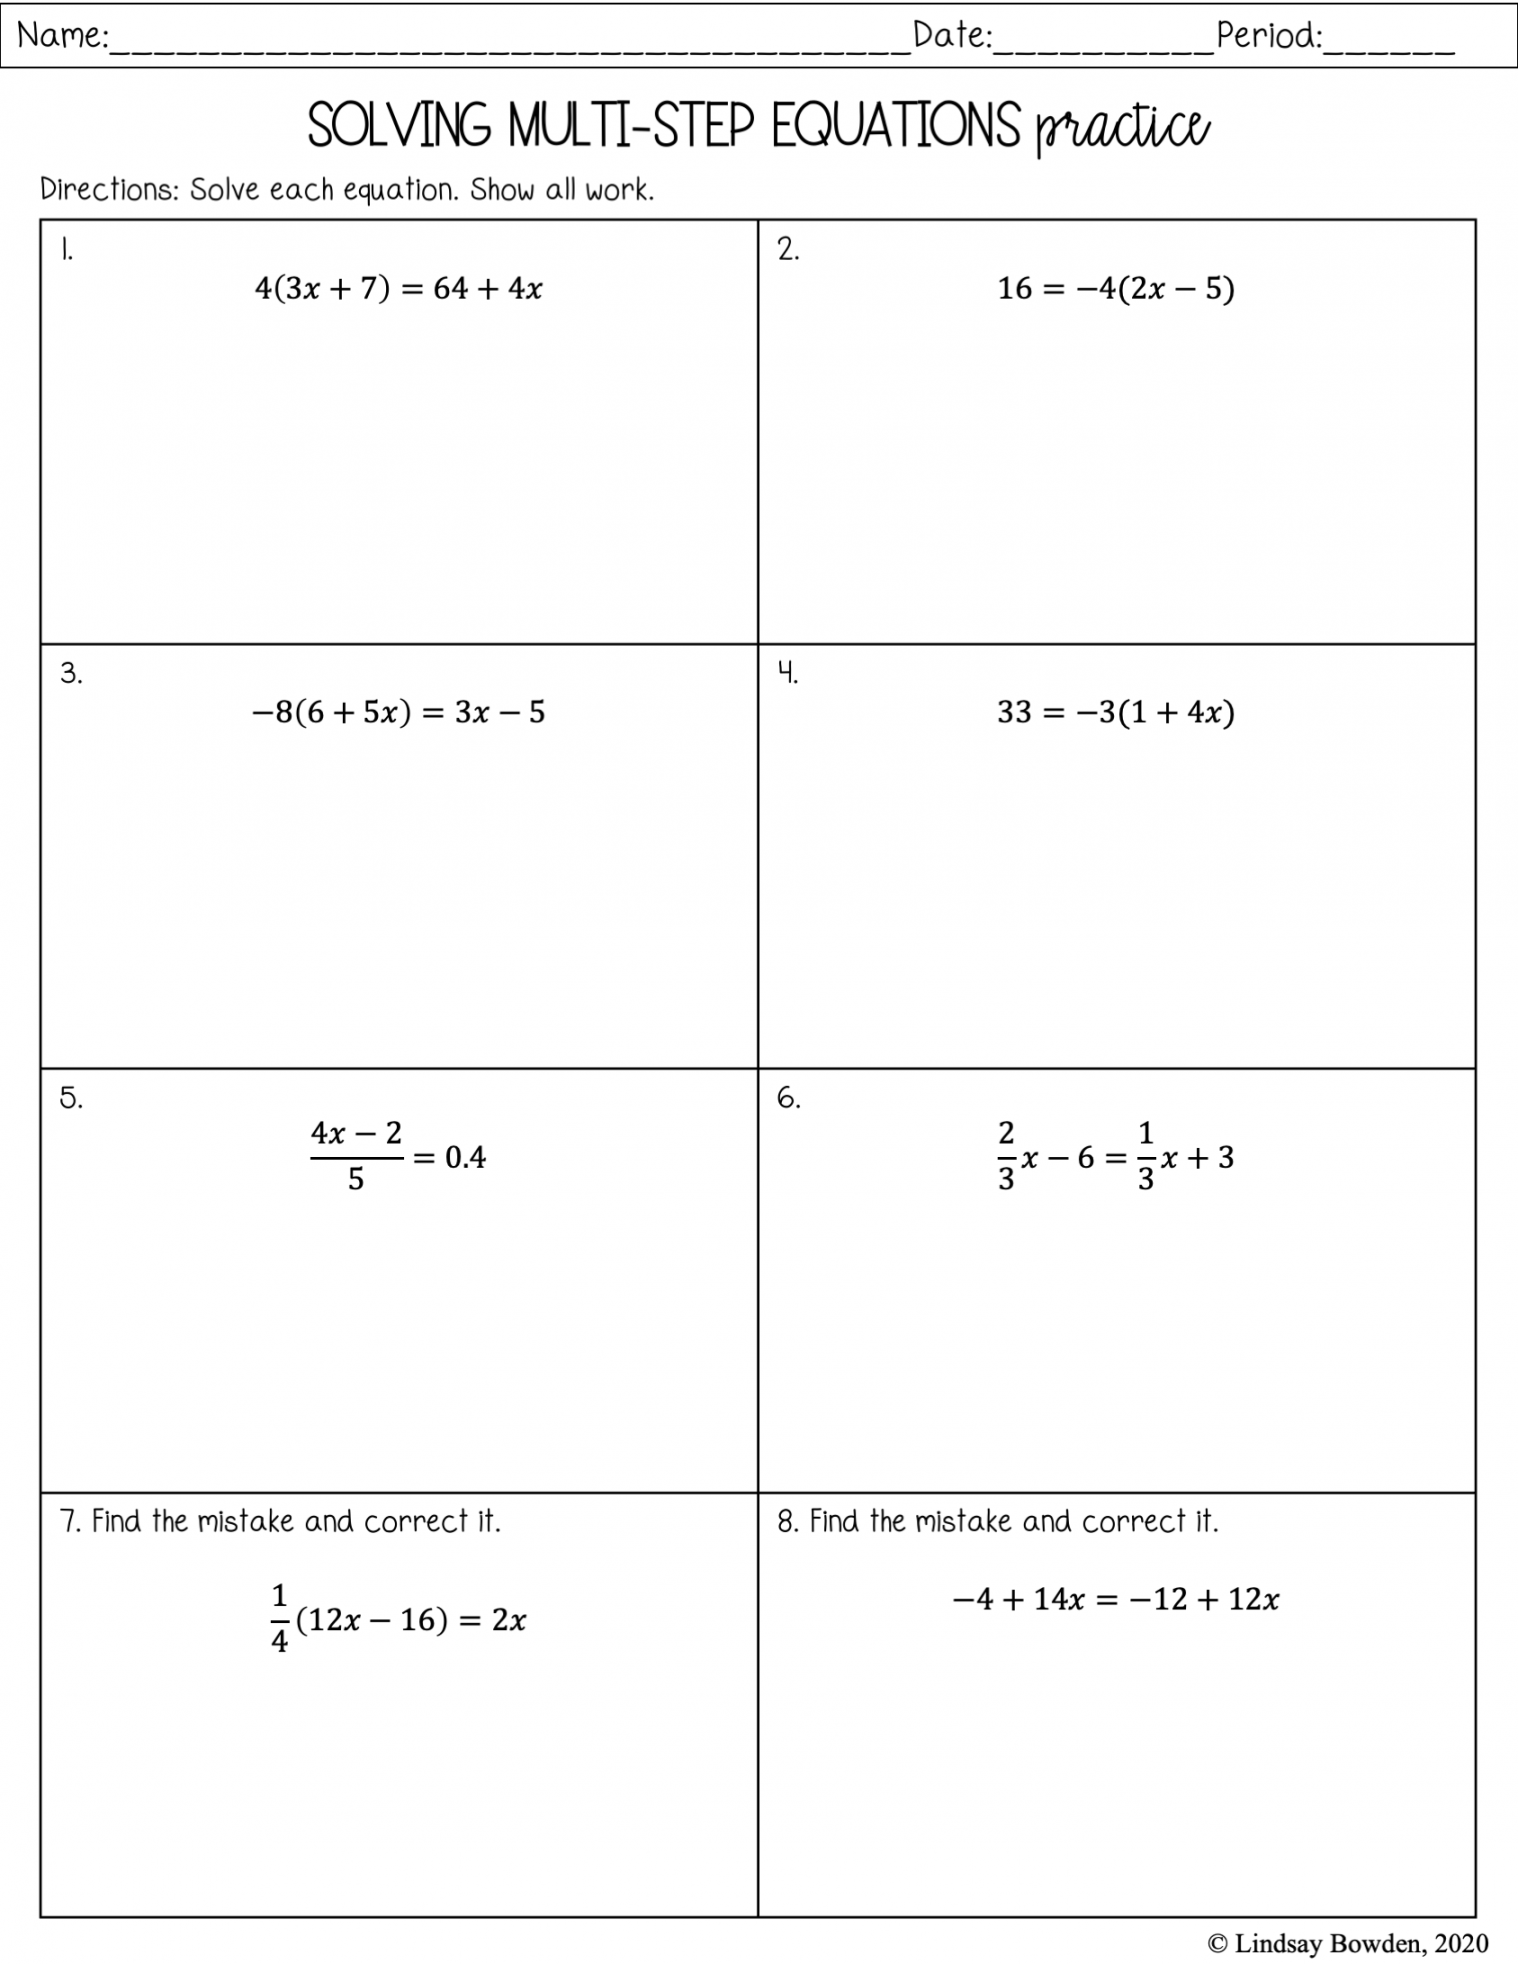 Multi-Step Equation Notes and Worksheets - Lindsay Bowden